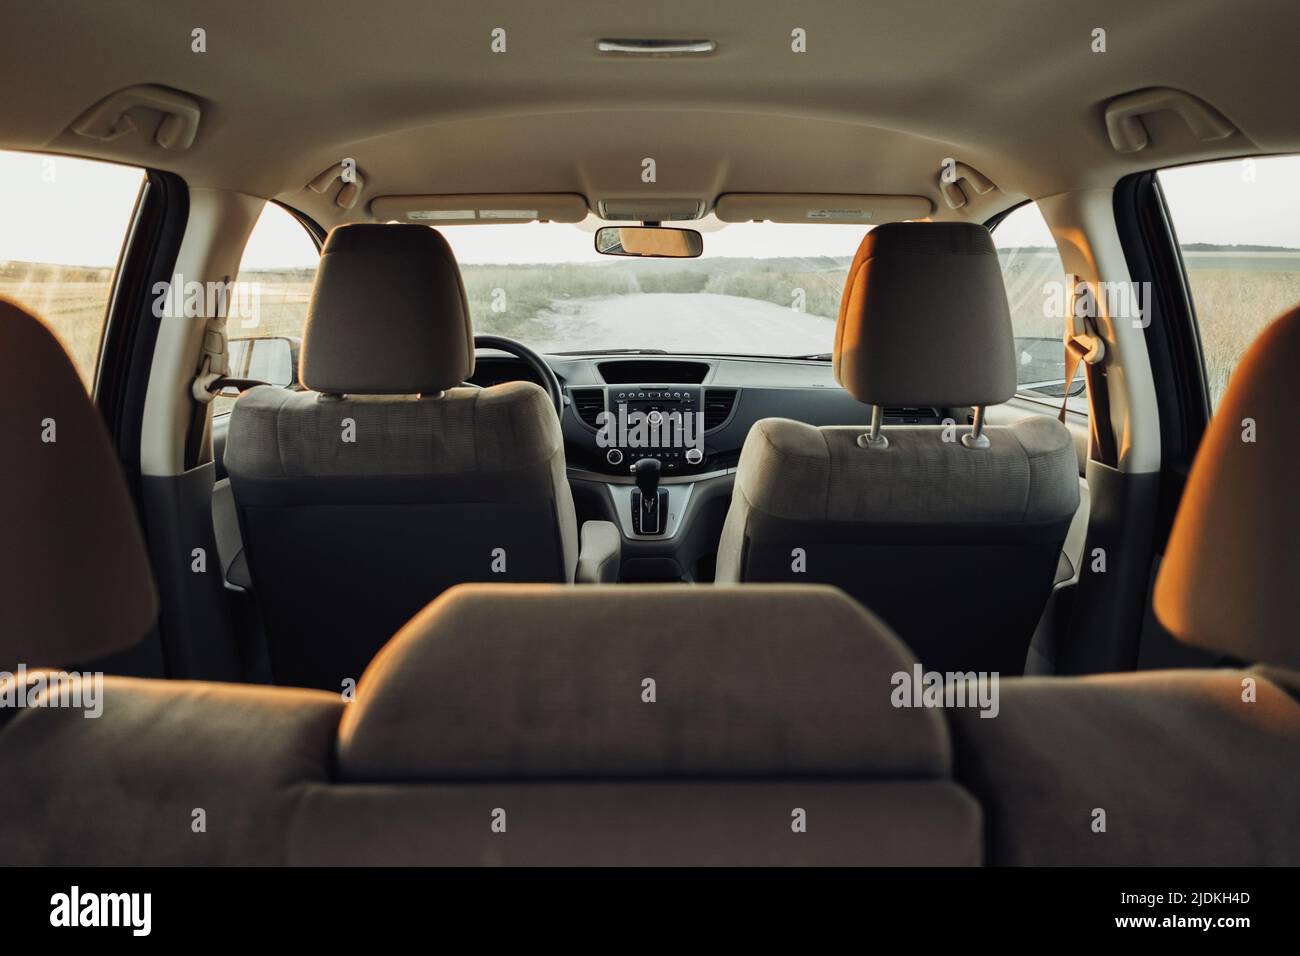 Back View from the Trunk of Interior of Modern SUV Car Stock Photo